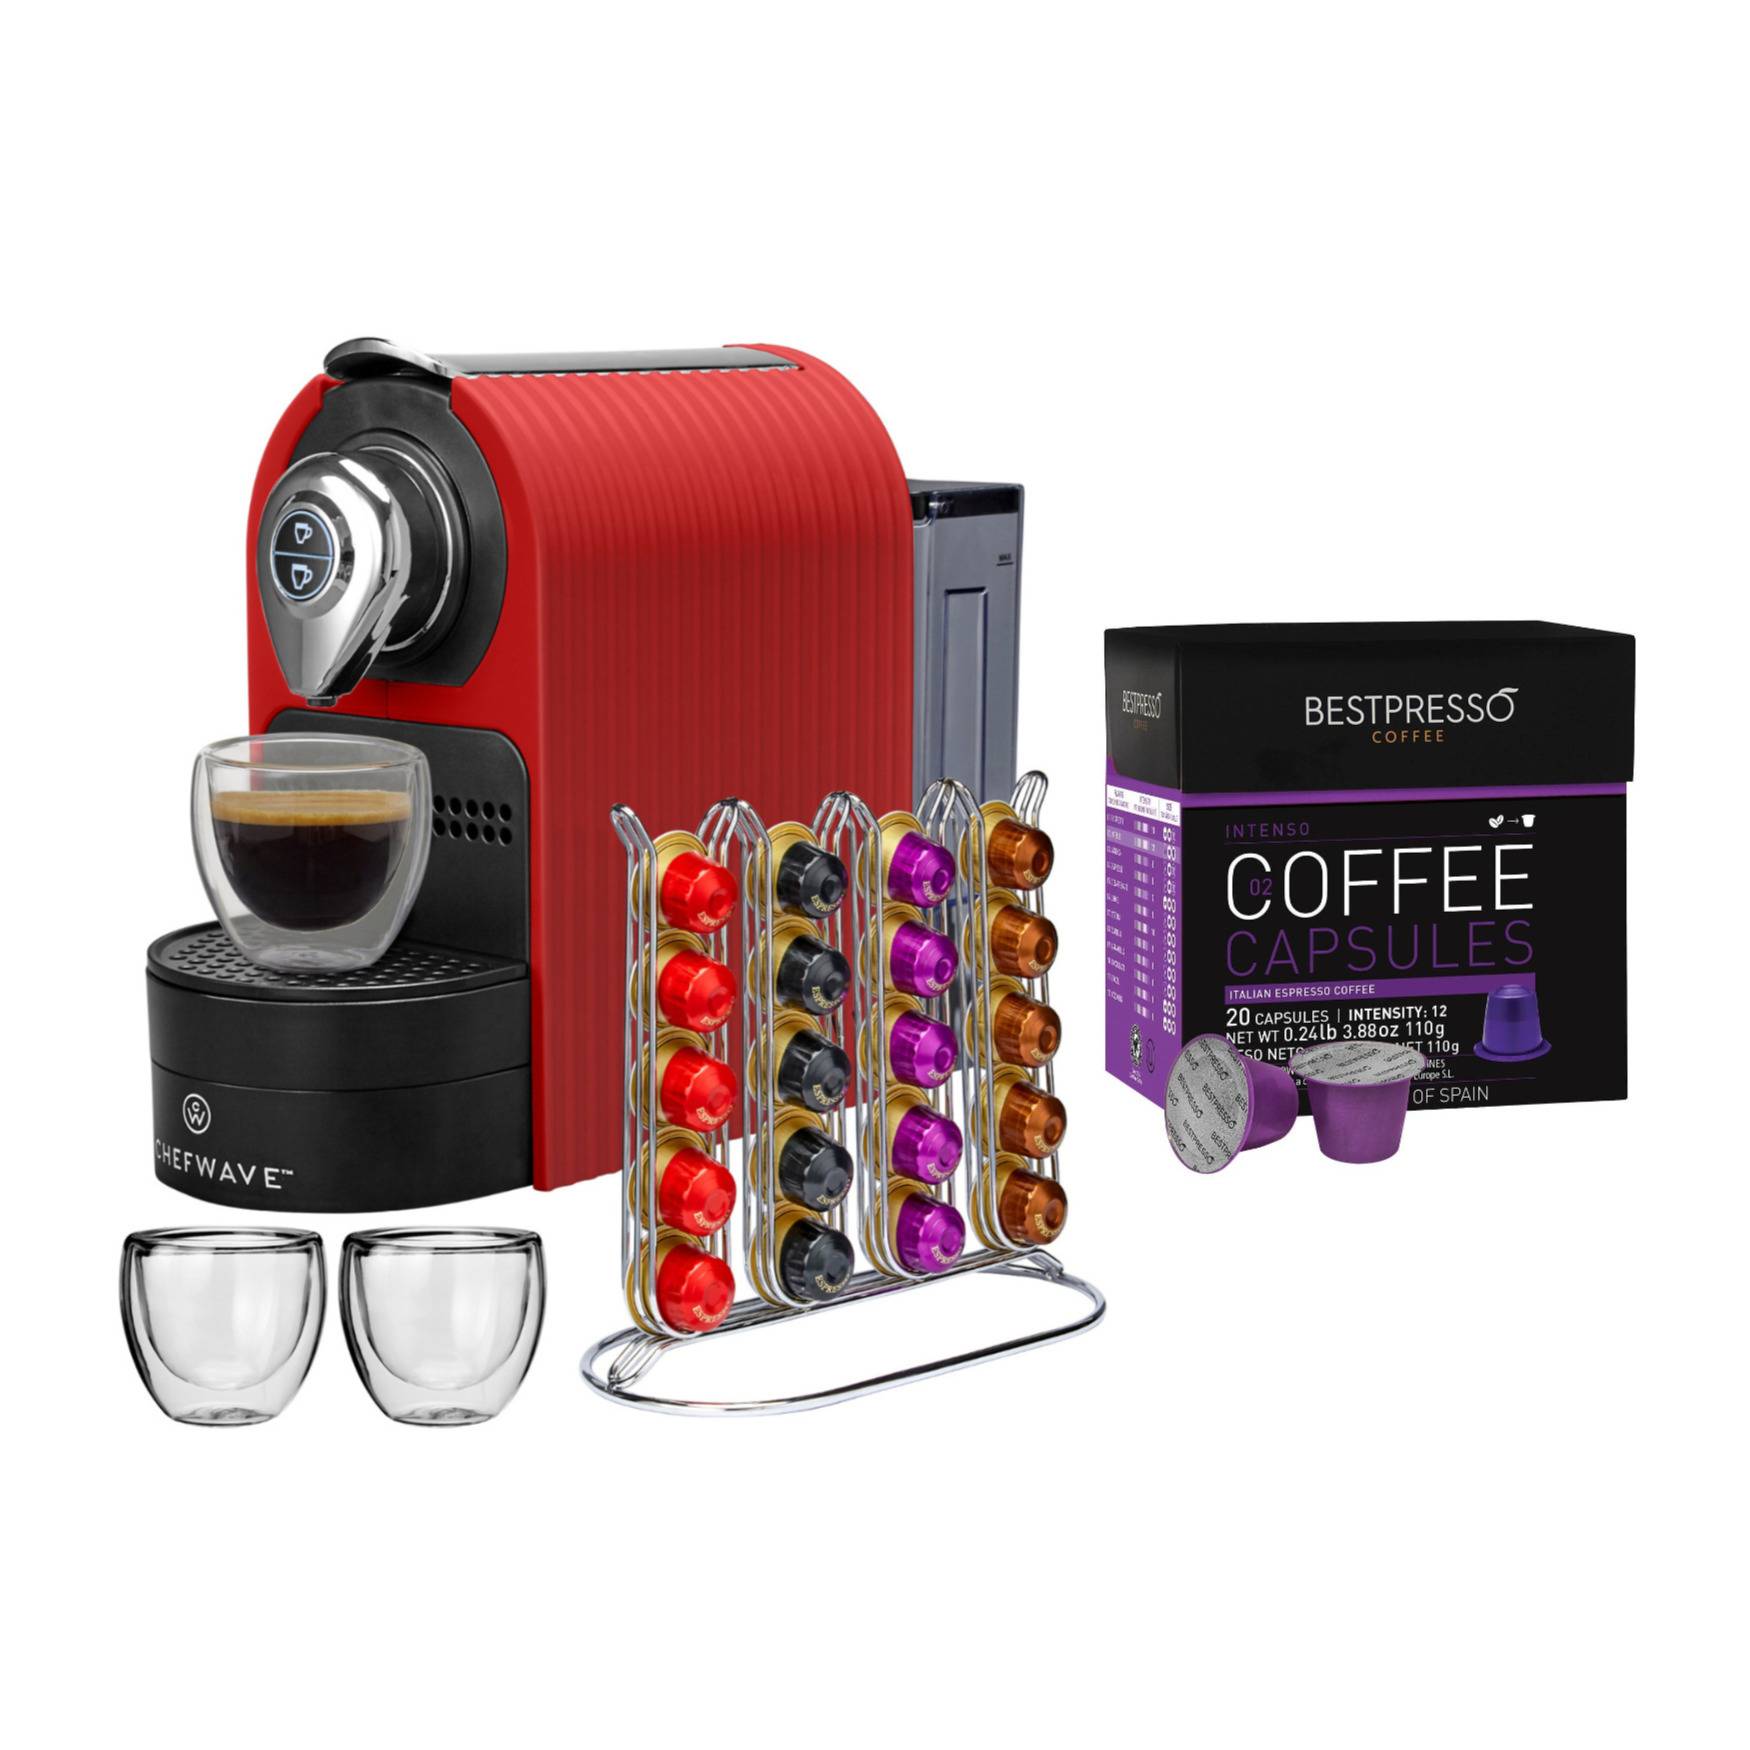 ChefWave Mini Espresso Machine (Red) with Capsule Holder, 2 Glass Cups and Coffee Capsules